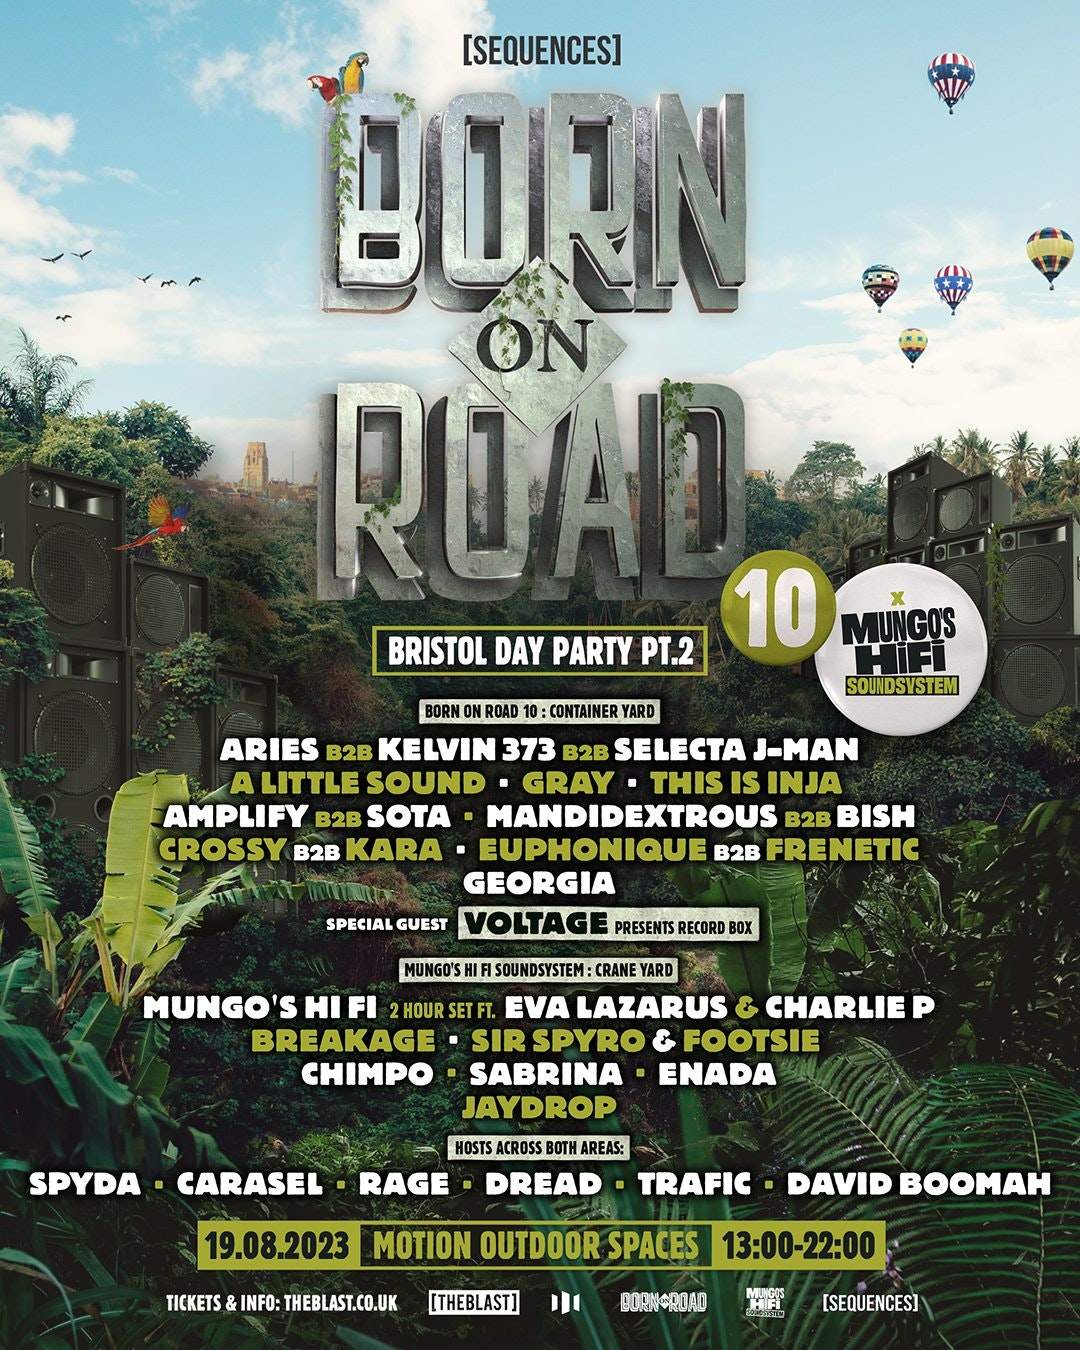 Sequences presents: Born On Road 10 Bristol Day Party Pt. 2 - フライヤー表